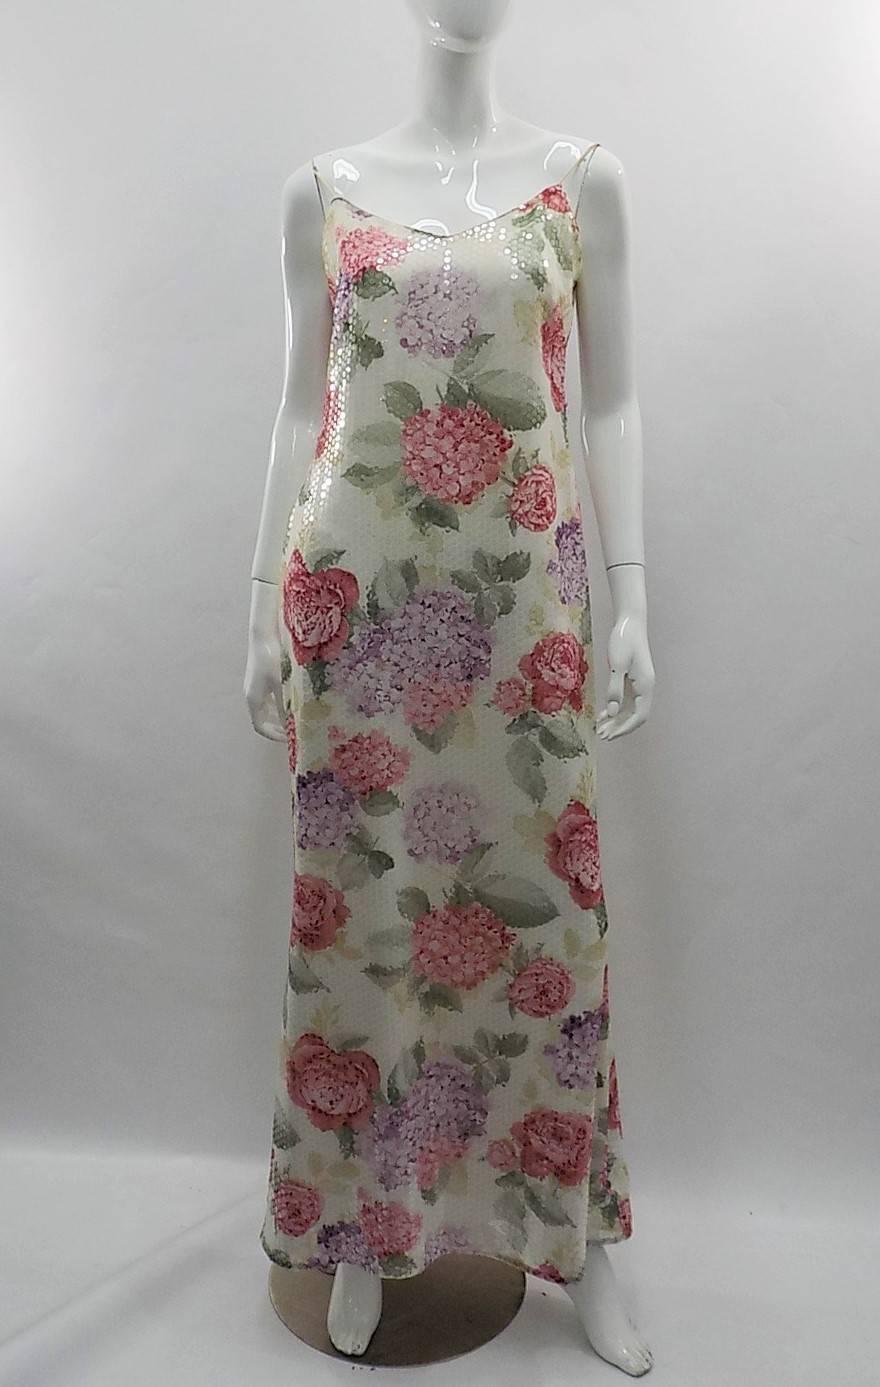 Perfect for summer garden or beach party!! Escada floral gown covered in clear sequins. Thin straps. Size 40 US 8
Bust 38-40